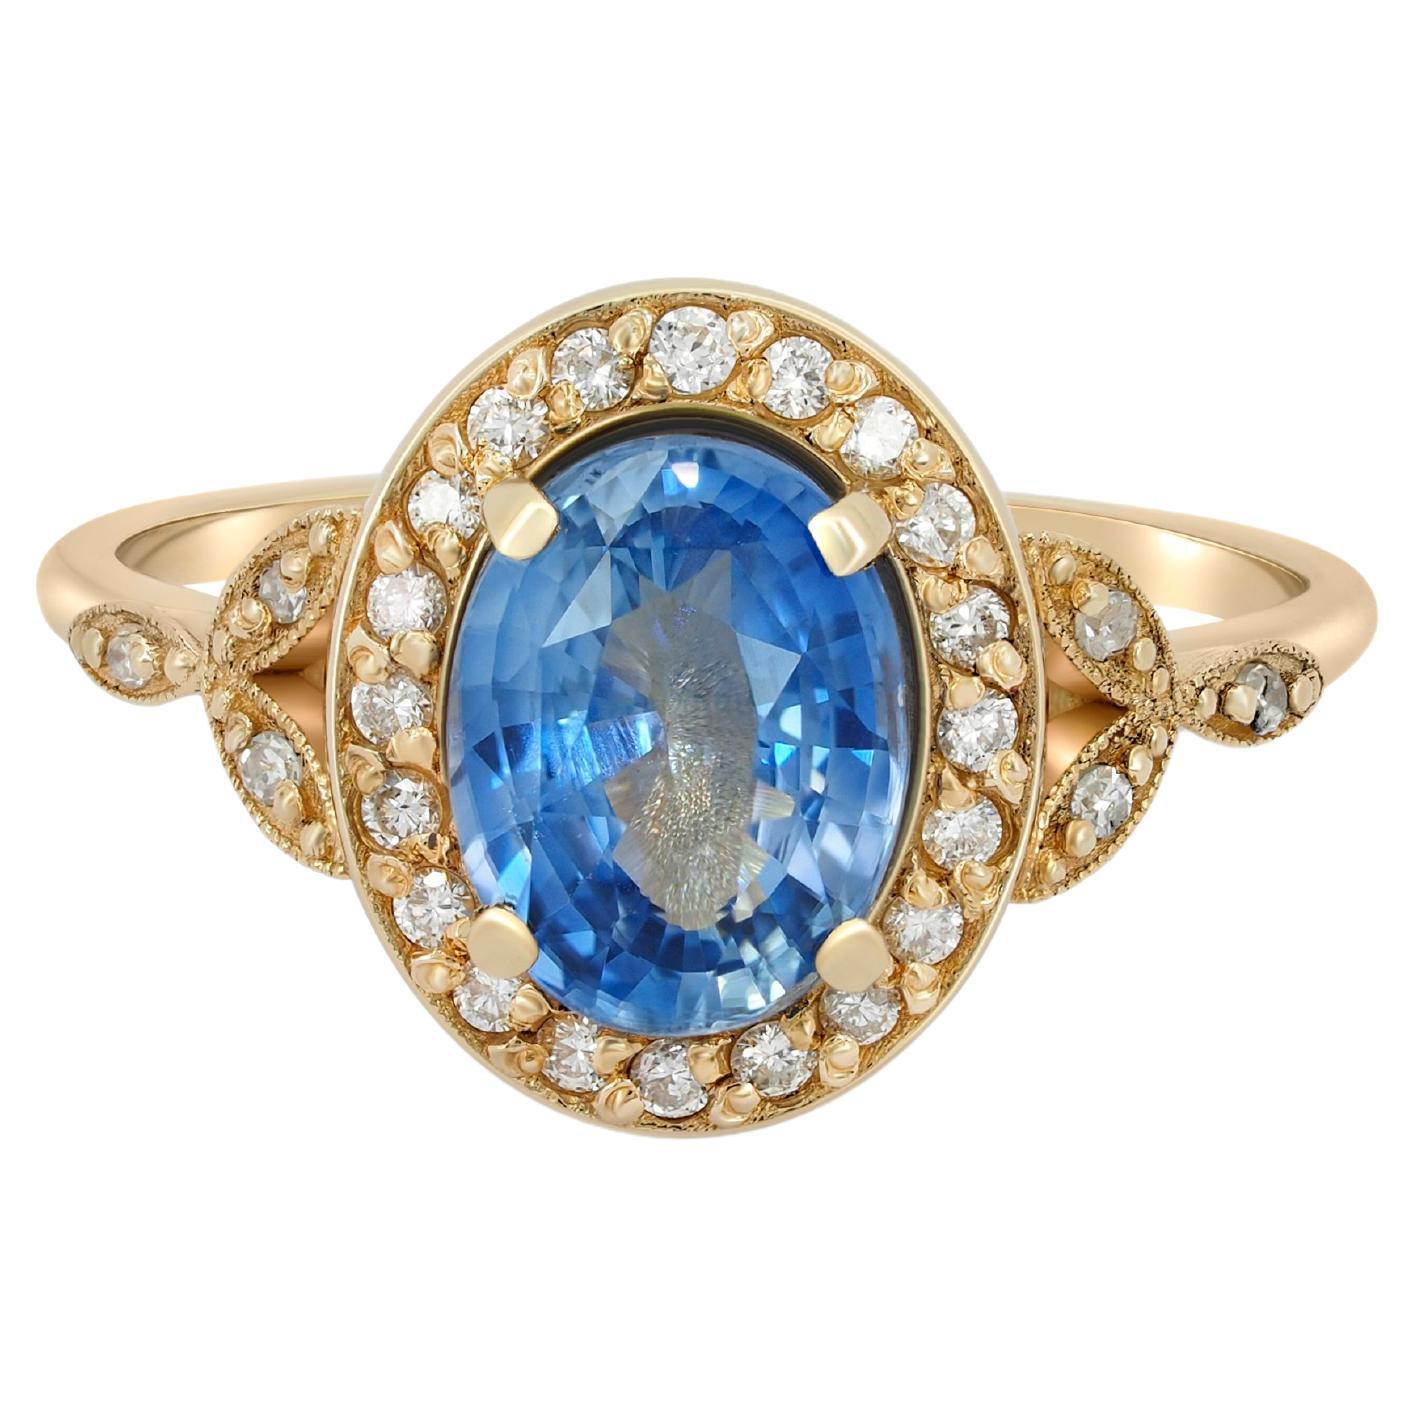 For Sale:  Vintage ring with sapphire and diamonds in 14k gold